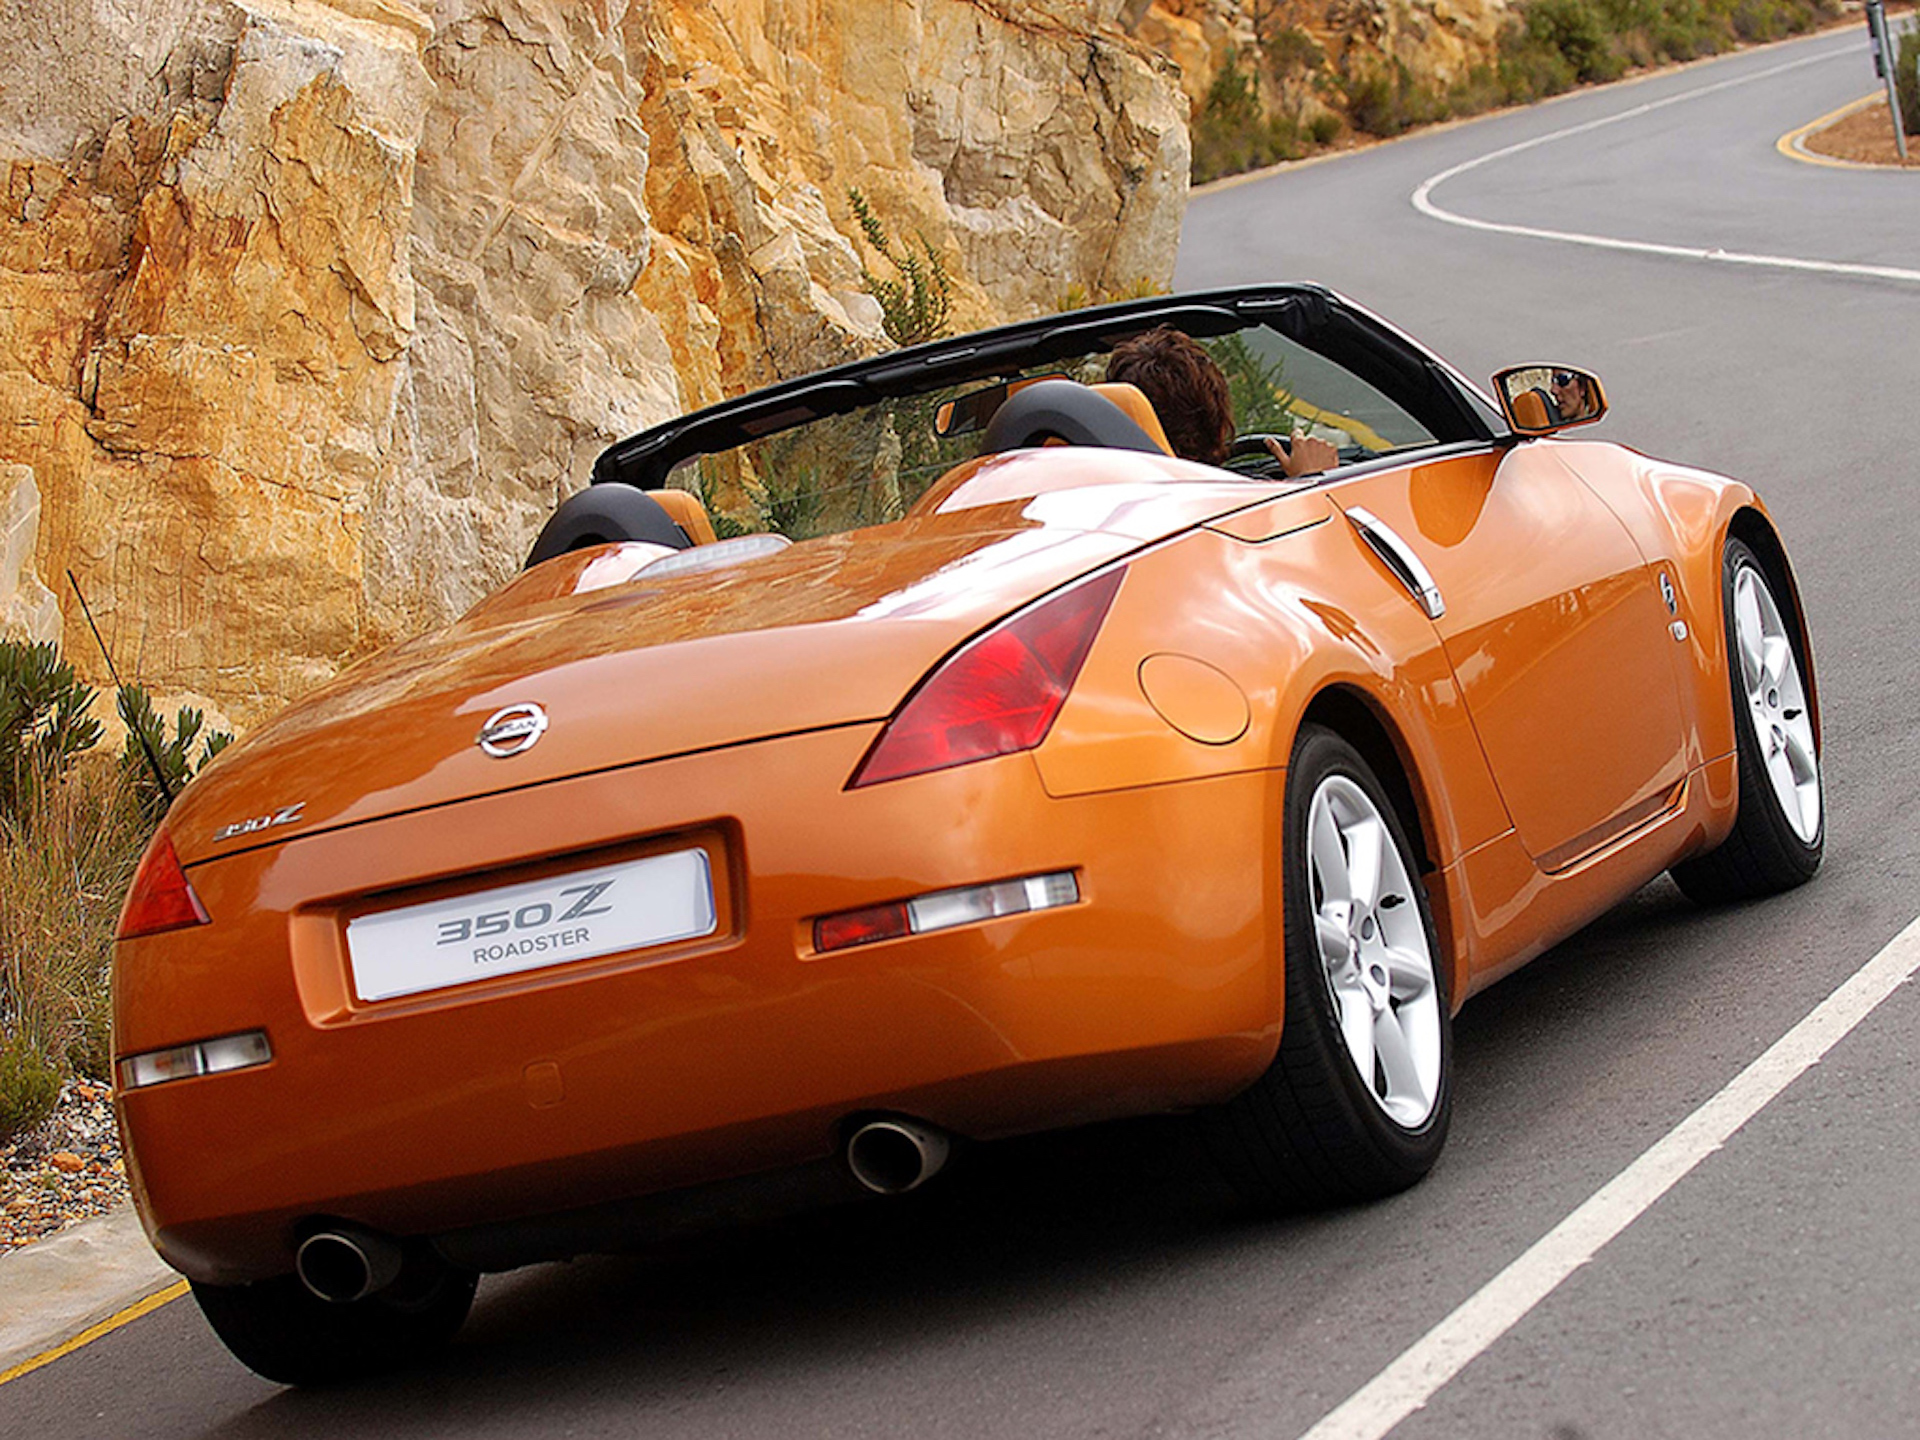 What's The Best Top-Down Sports Car For Less Than $10k?